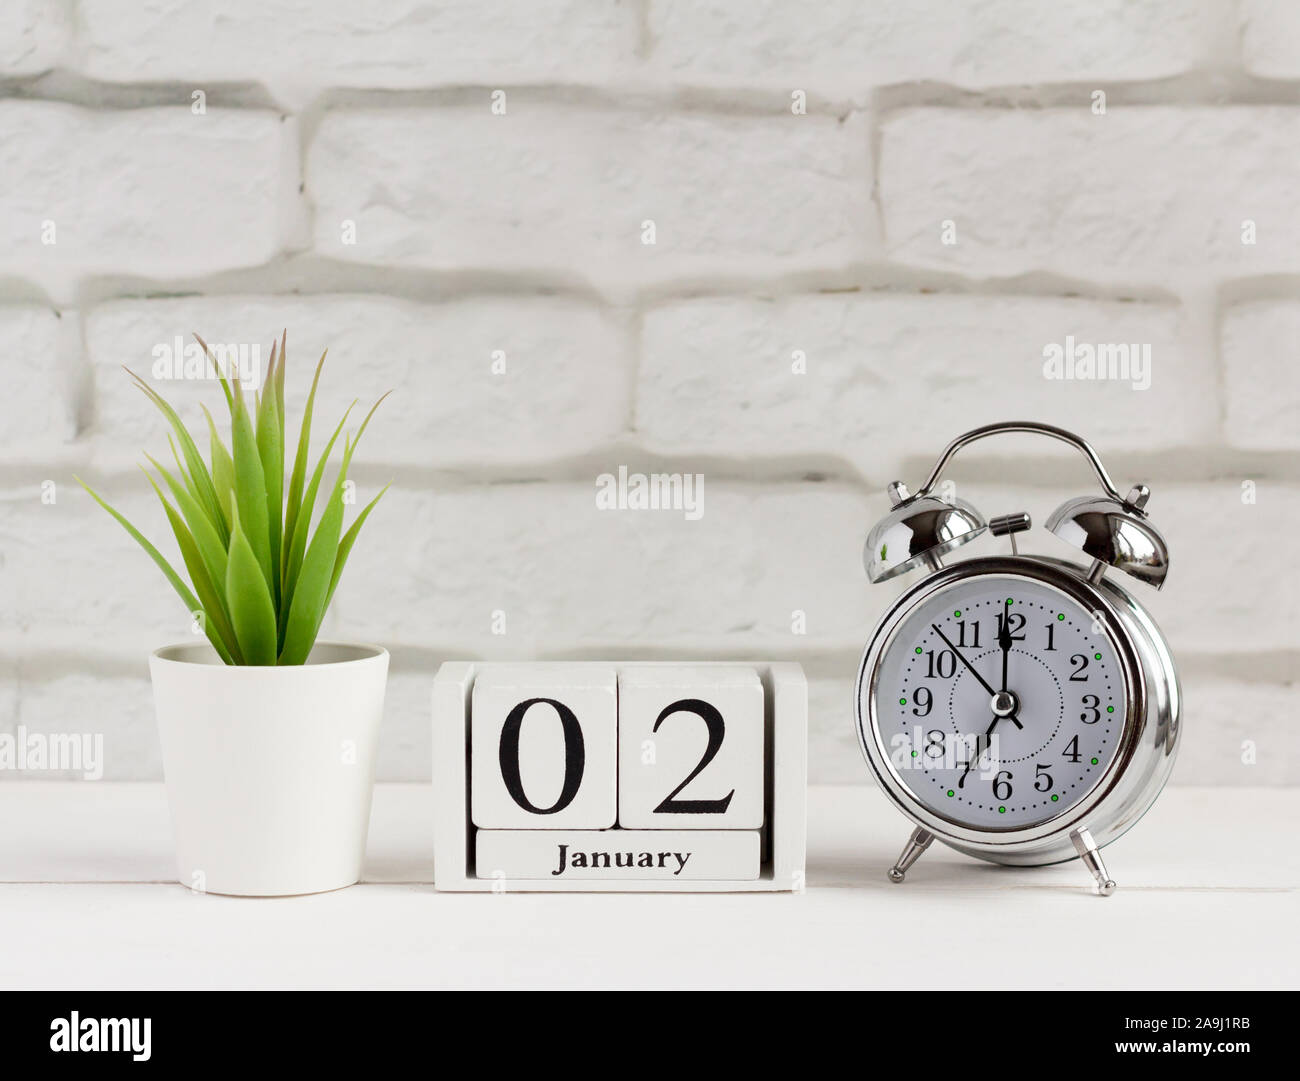 January 2 on the wooden calendar, the beginning of a new day and year Stock Photo